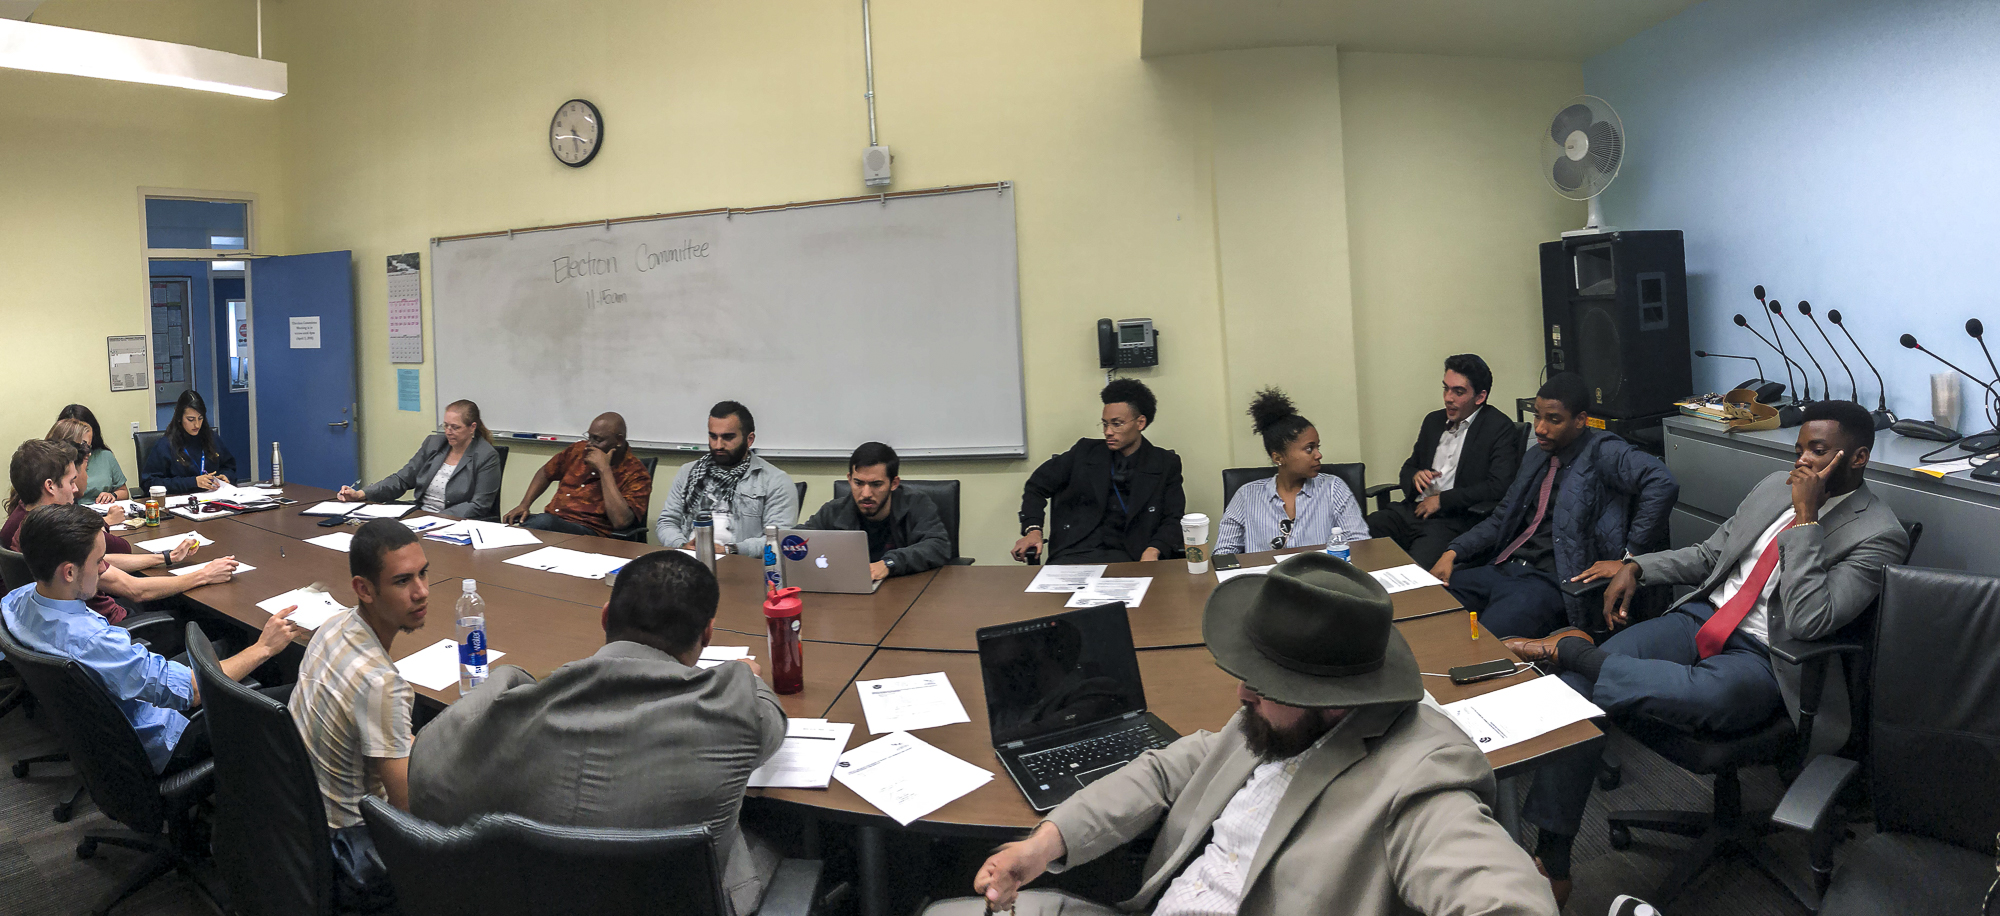  The Election Committee Members discuss a variety of filed violations amongst committee members and Associated Student candidates at the election committee meeting held in the conference room in the Cayton Center on Santa Monica College’s main campus